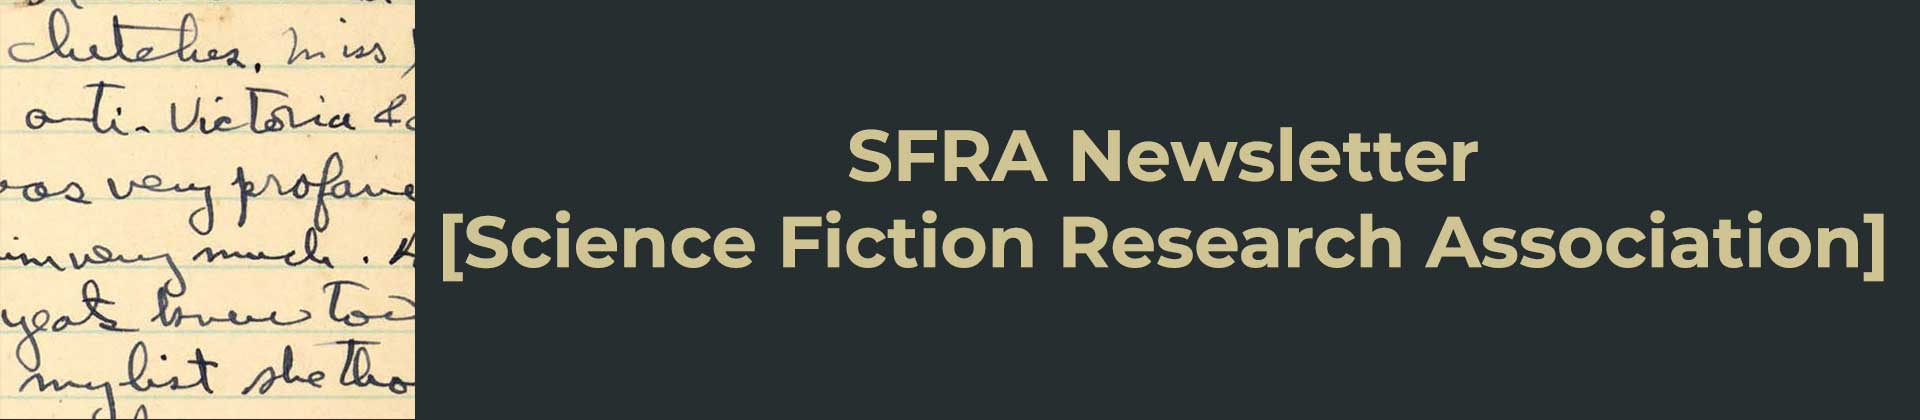 SFRA Newsletter (Science Fiction Research Association)